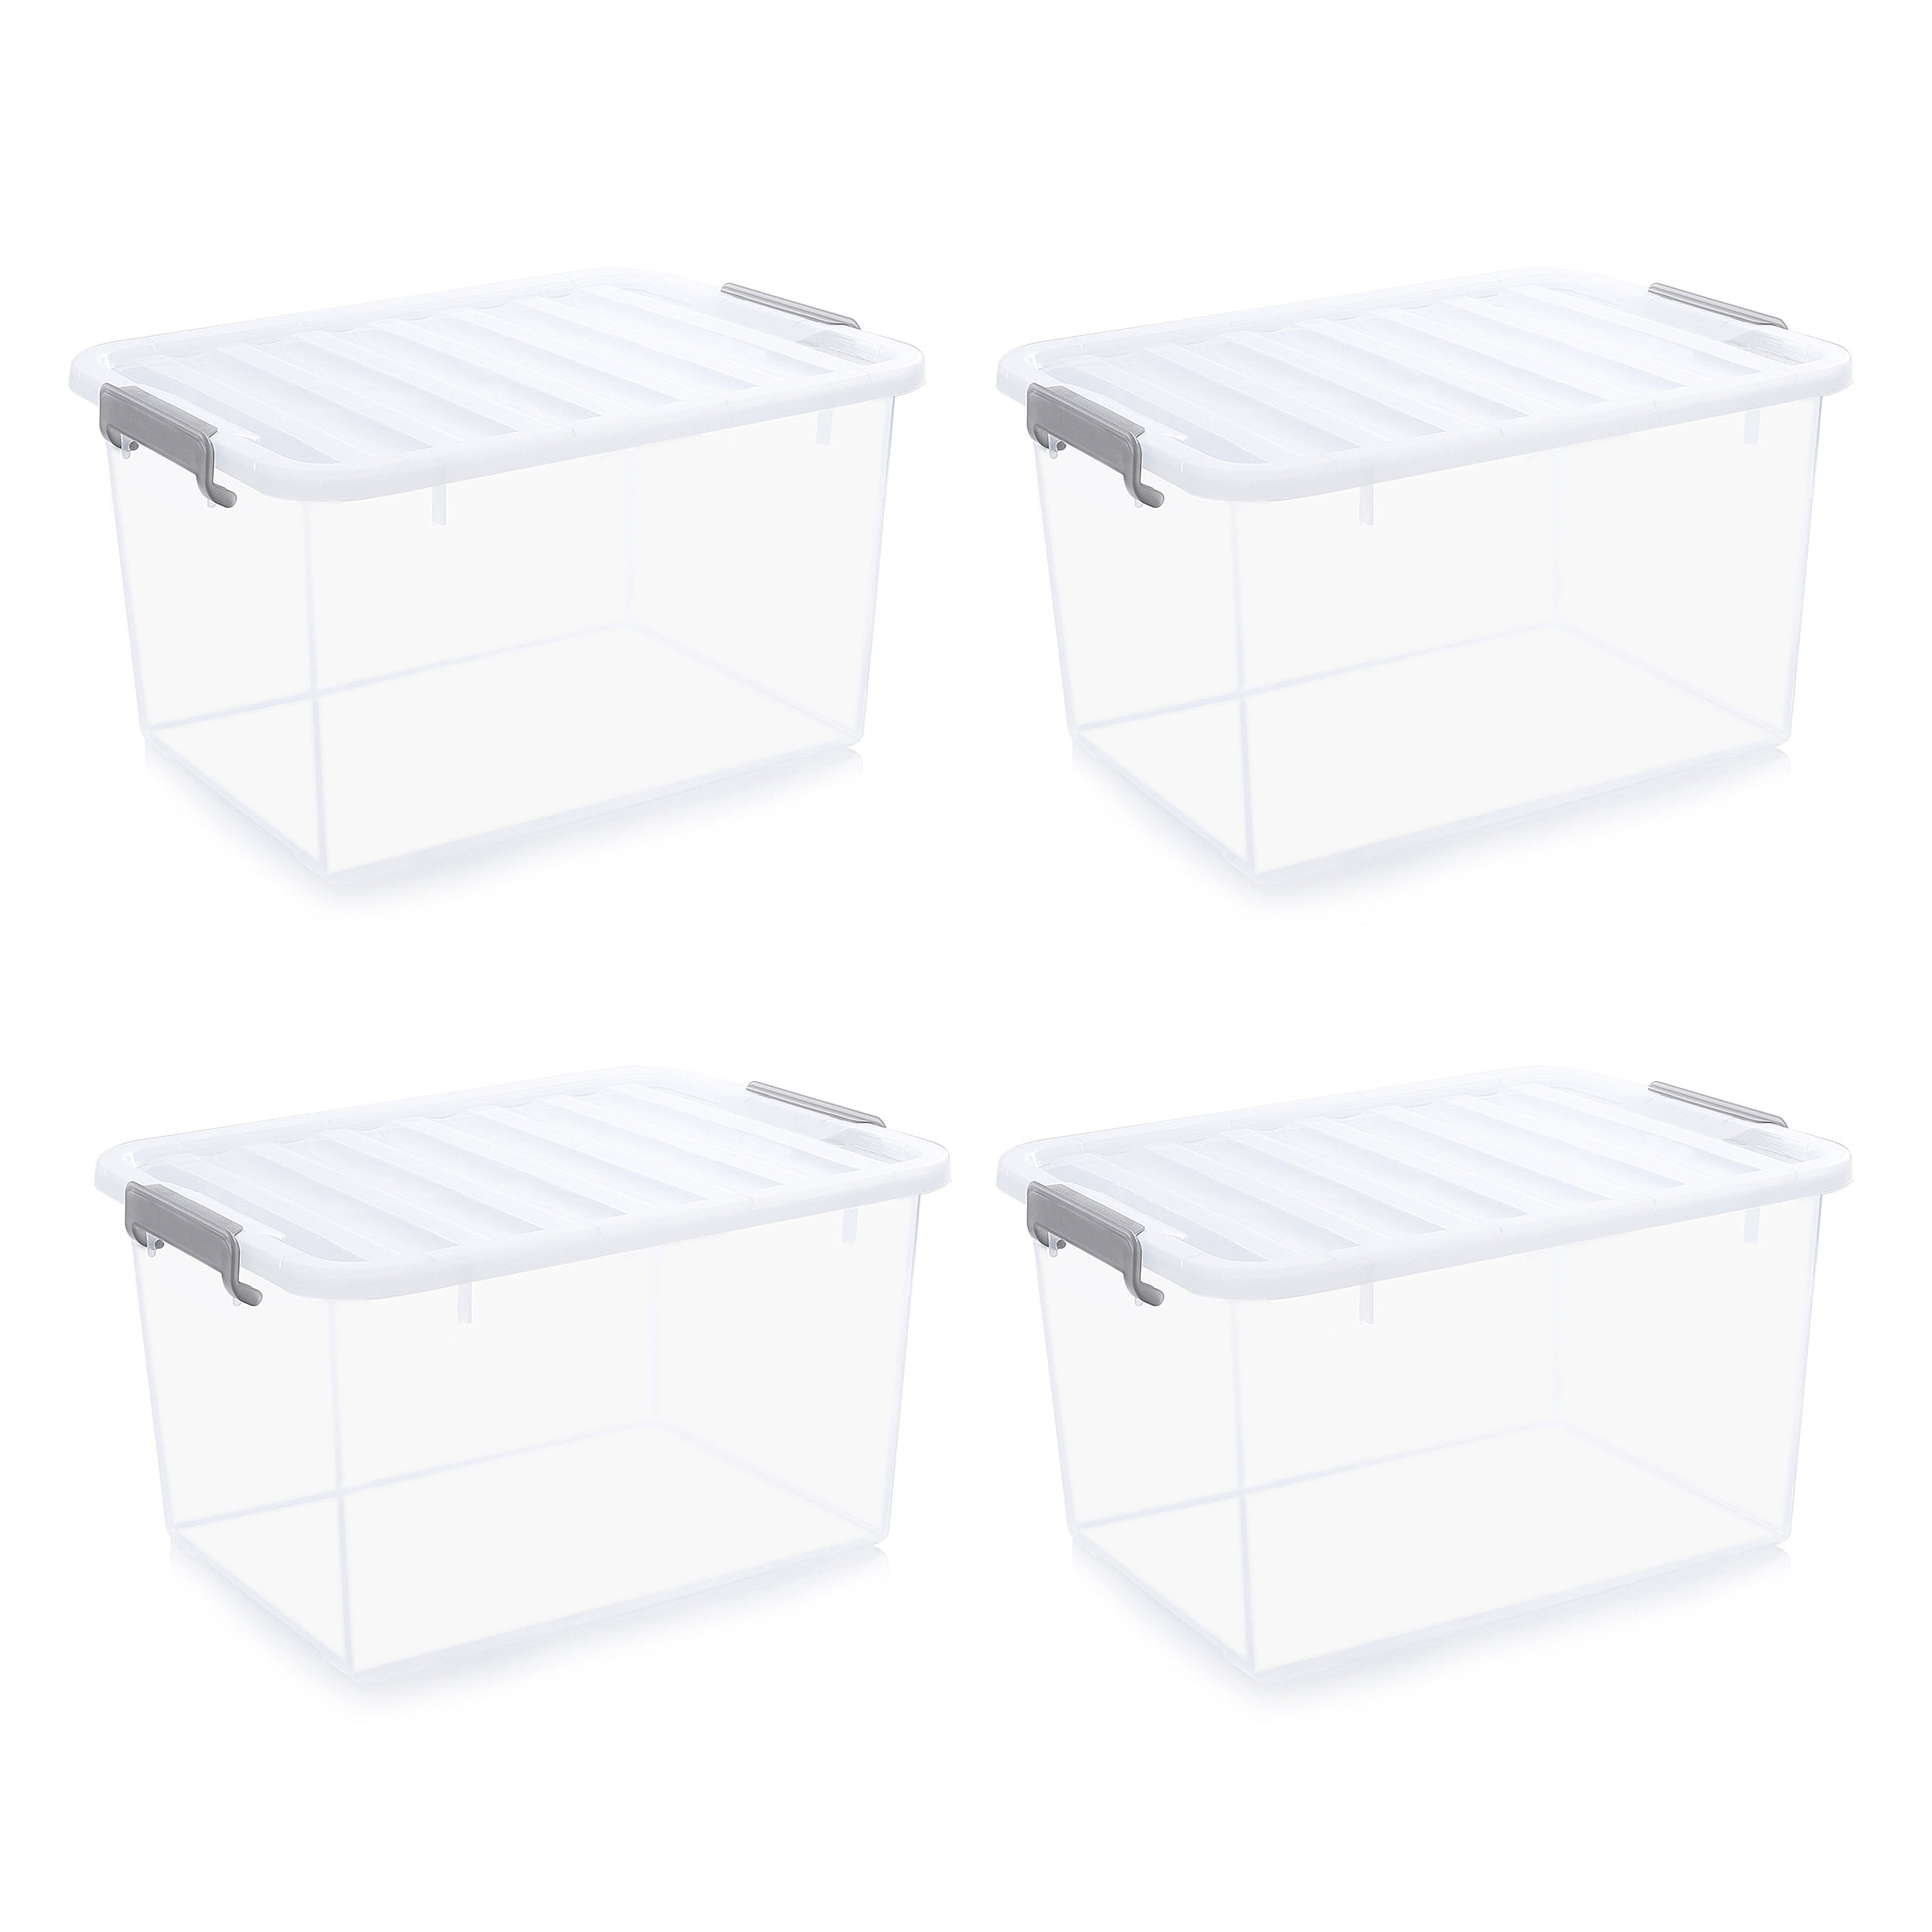 Citylife 44.4 QT Plastic Storage Bins with Latching Lids Stackable